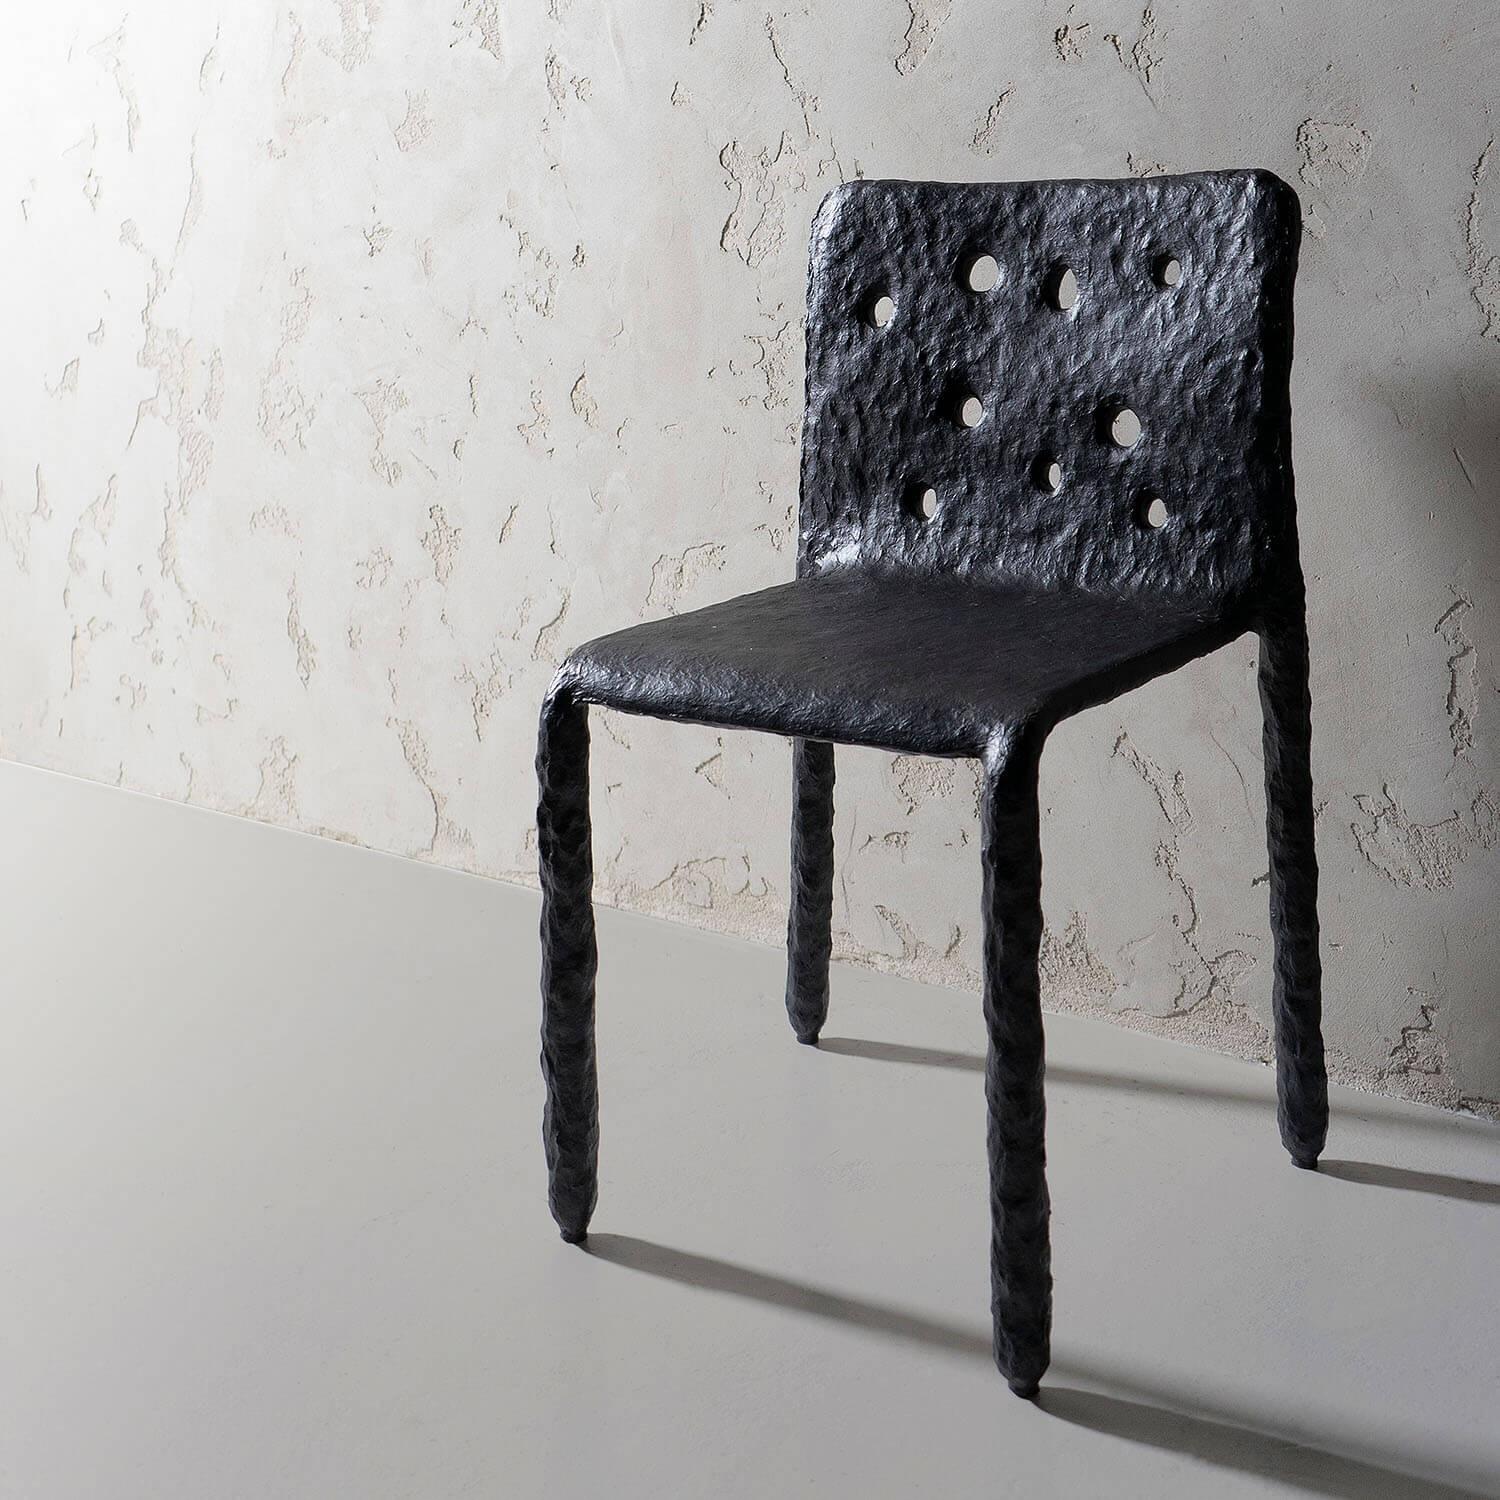 Sculpted indoor contemporary chair by Faina.
Design: Victoriya Yakusha.
Material: steel, flax rubber, biopolymer, cellulose.
Dimensions: height: 82 x width 48 x legs depth 45 cm.
 Weight: 12 kilos.
(Also available in longer version 240 cm